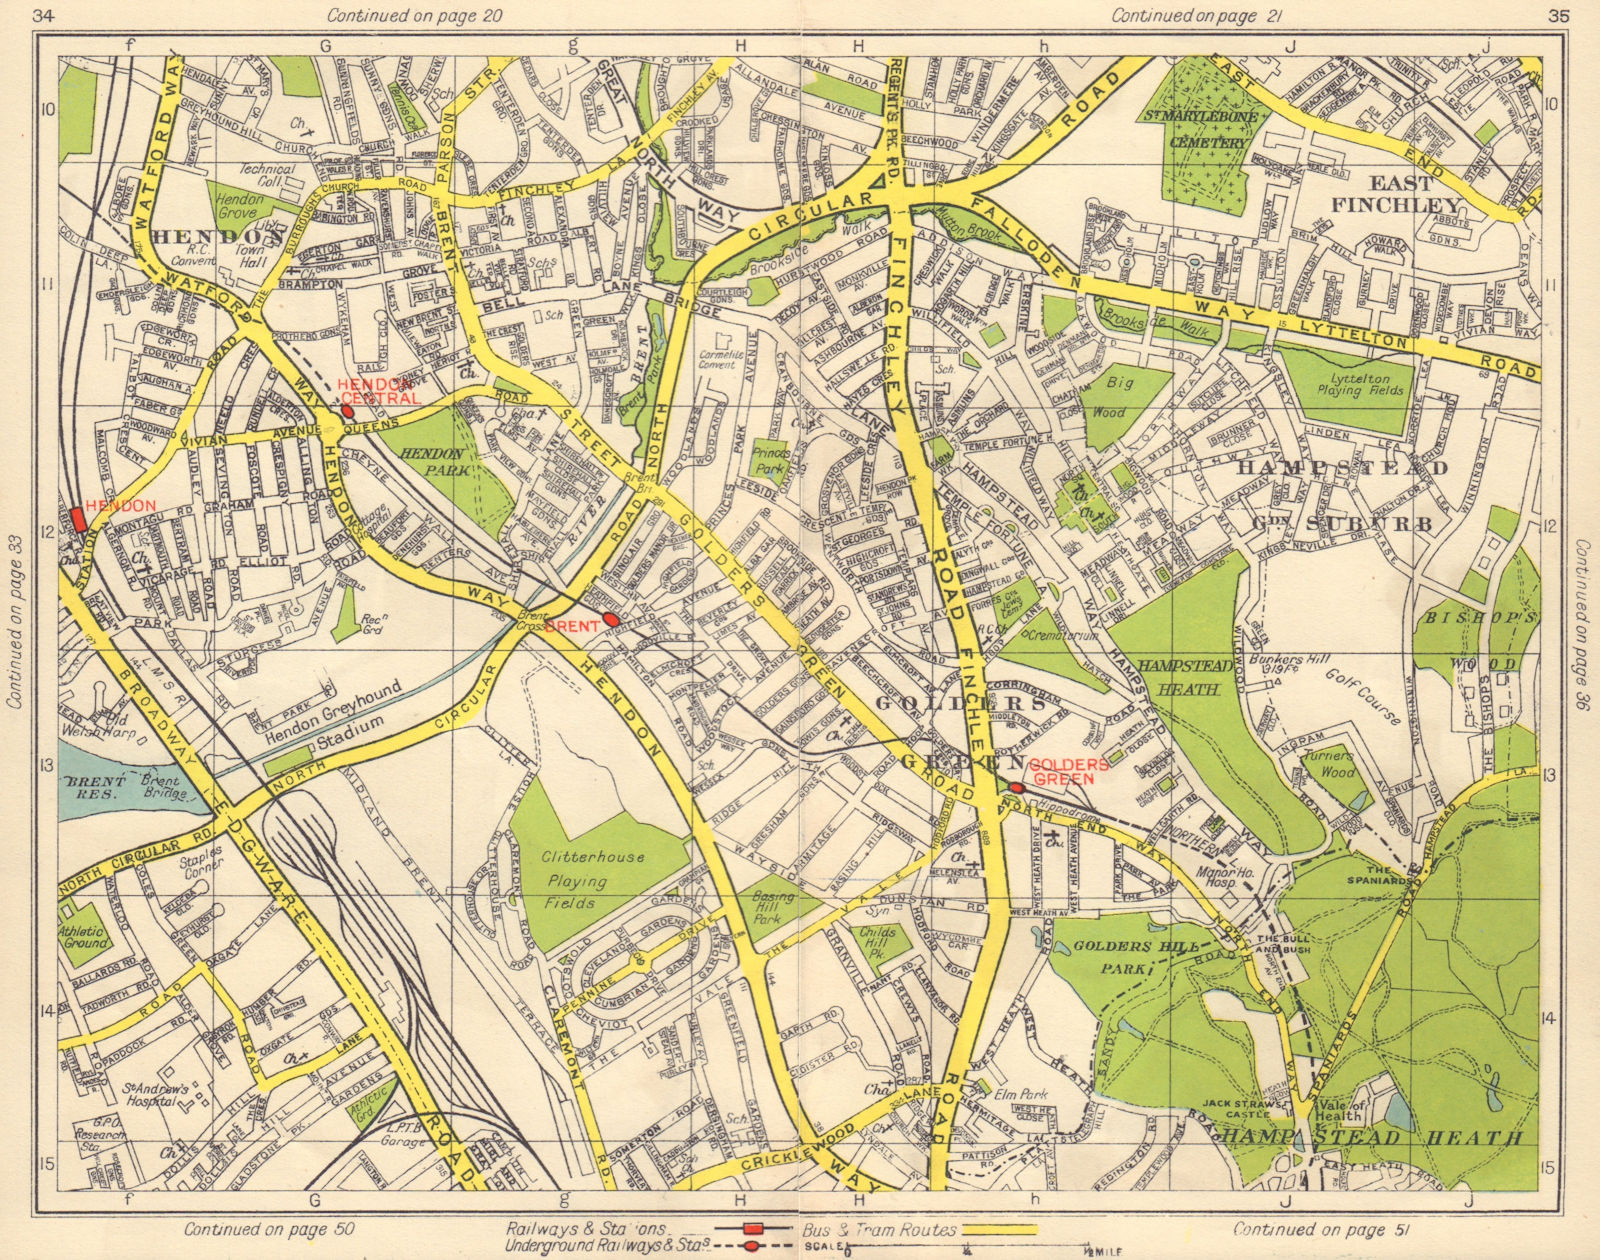 Associate Product NW LONDON. Hendon East Finchley Golder's Green Child's Hill North End 1948 map